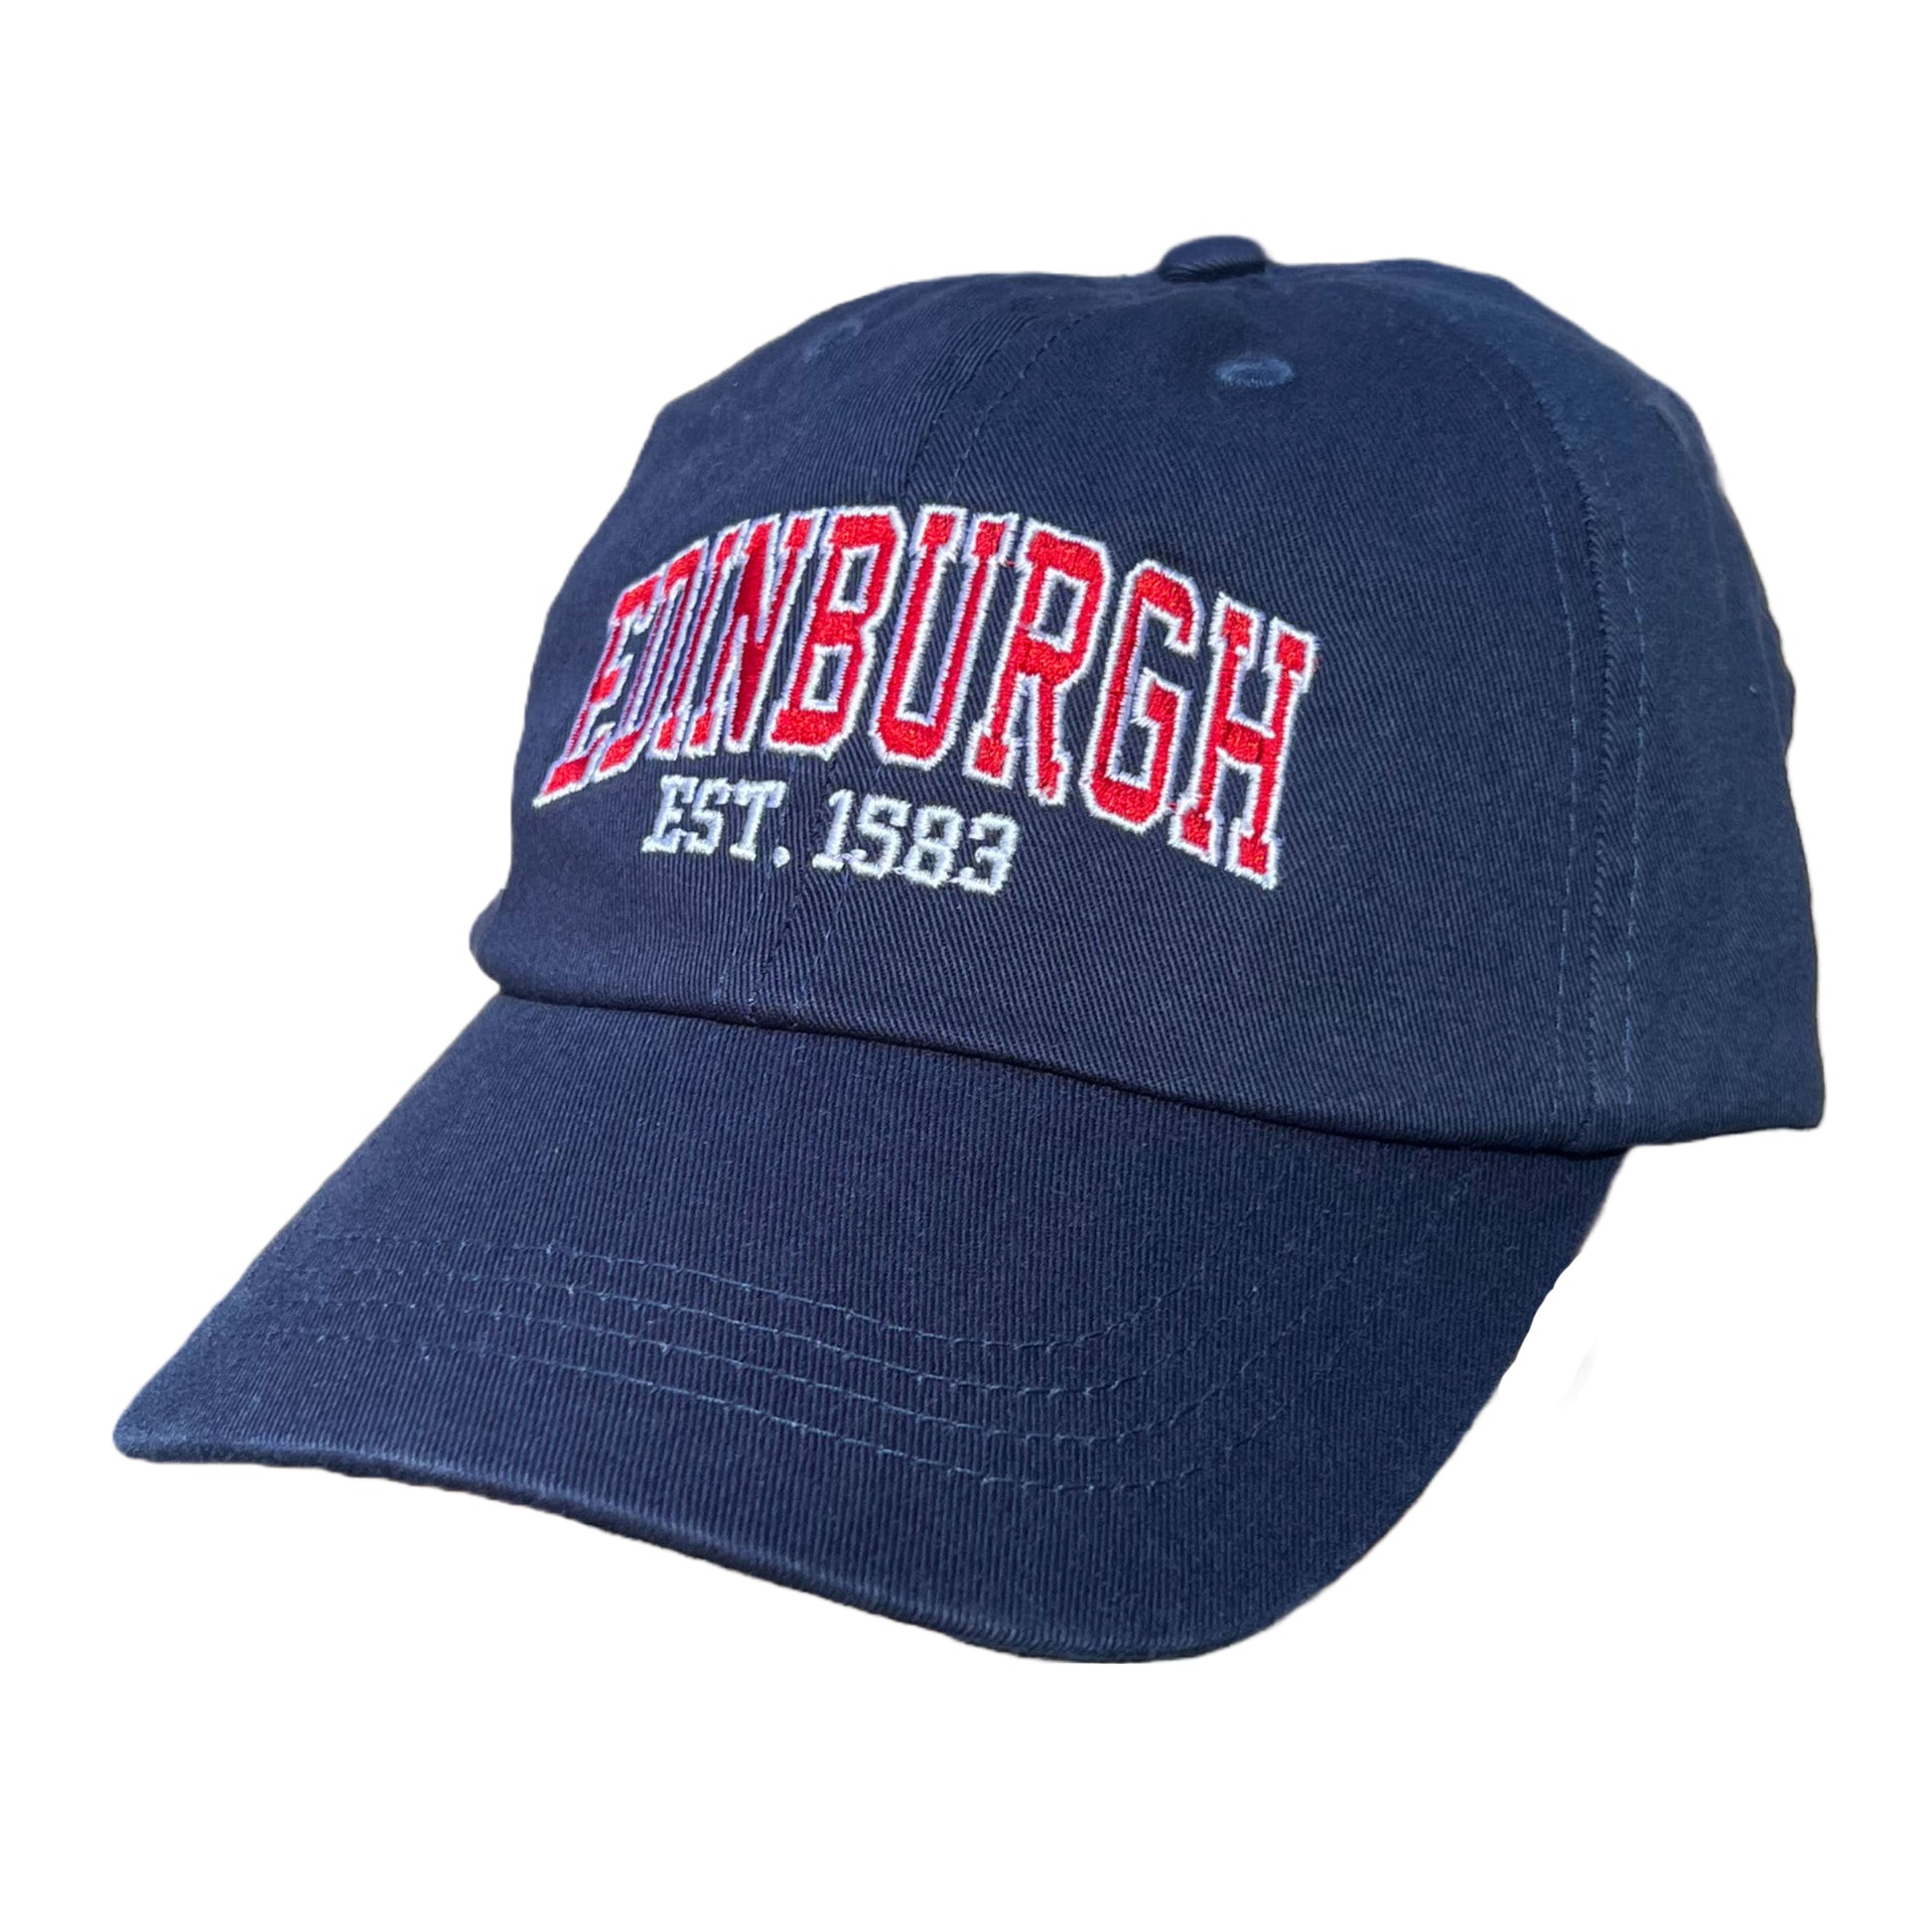 Navy baseball cap with red and white embriodered text stating 'EDINBURGH'. Beneath is smaller white embriodered text stating 'EST. 1583'.